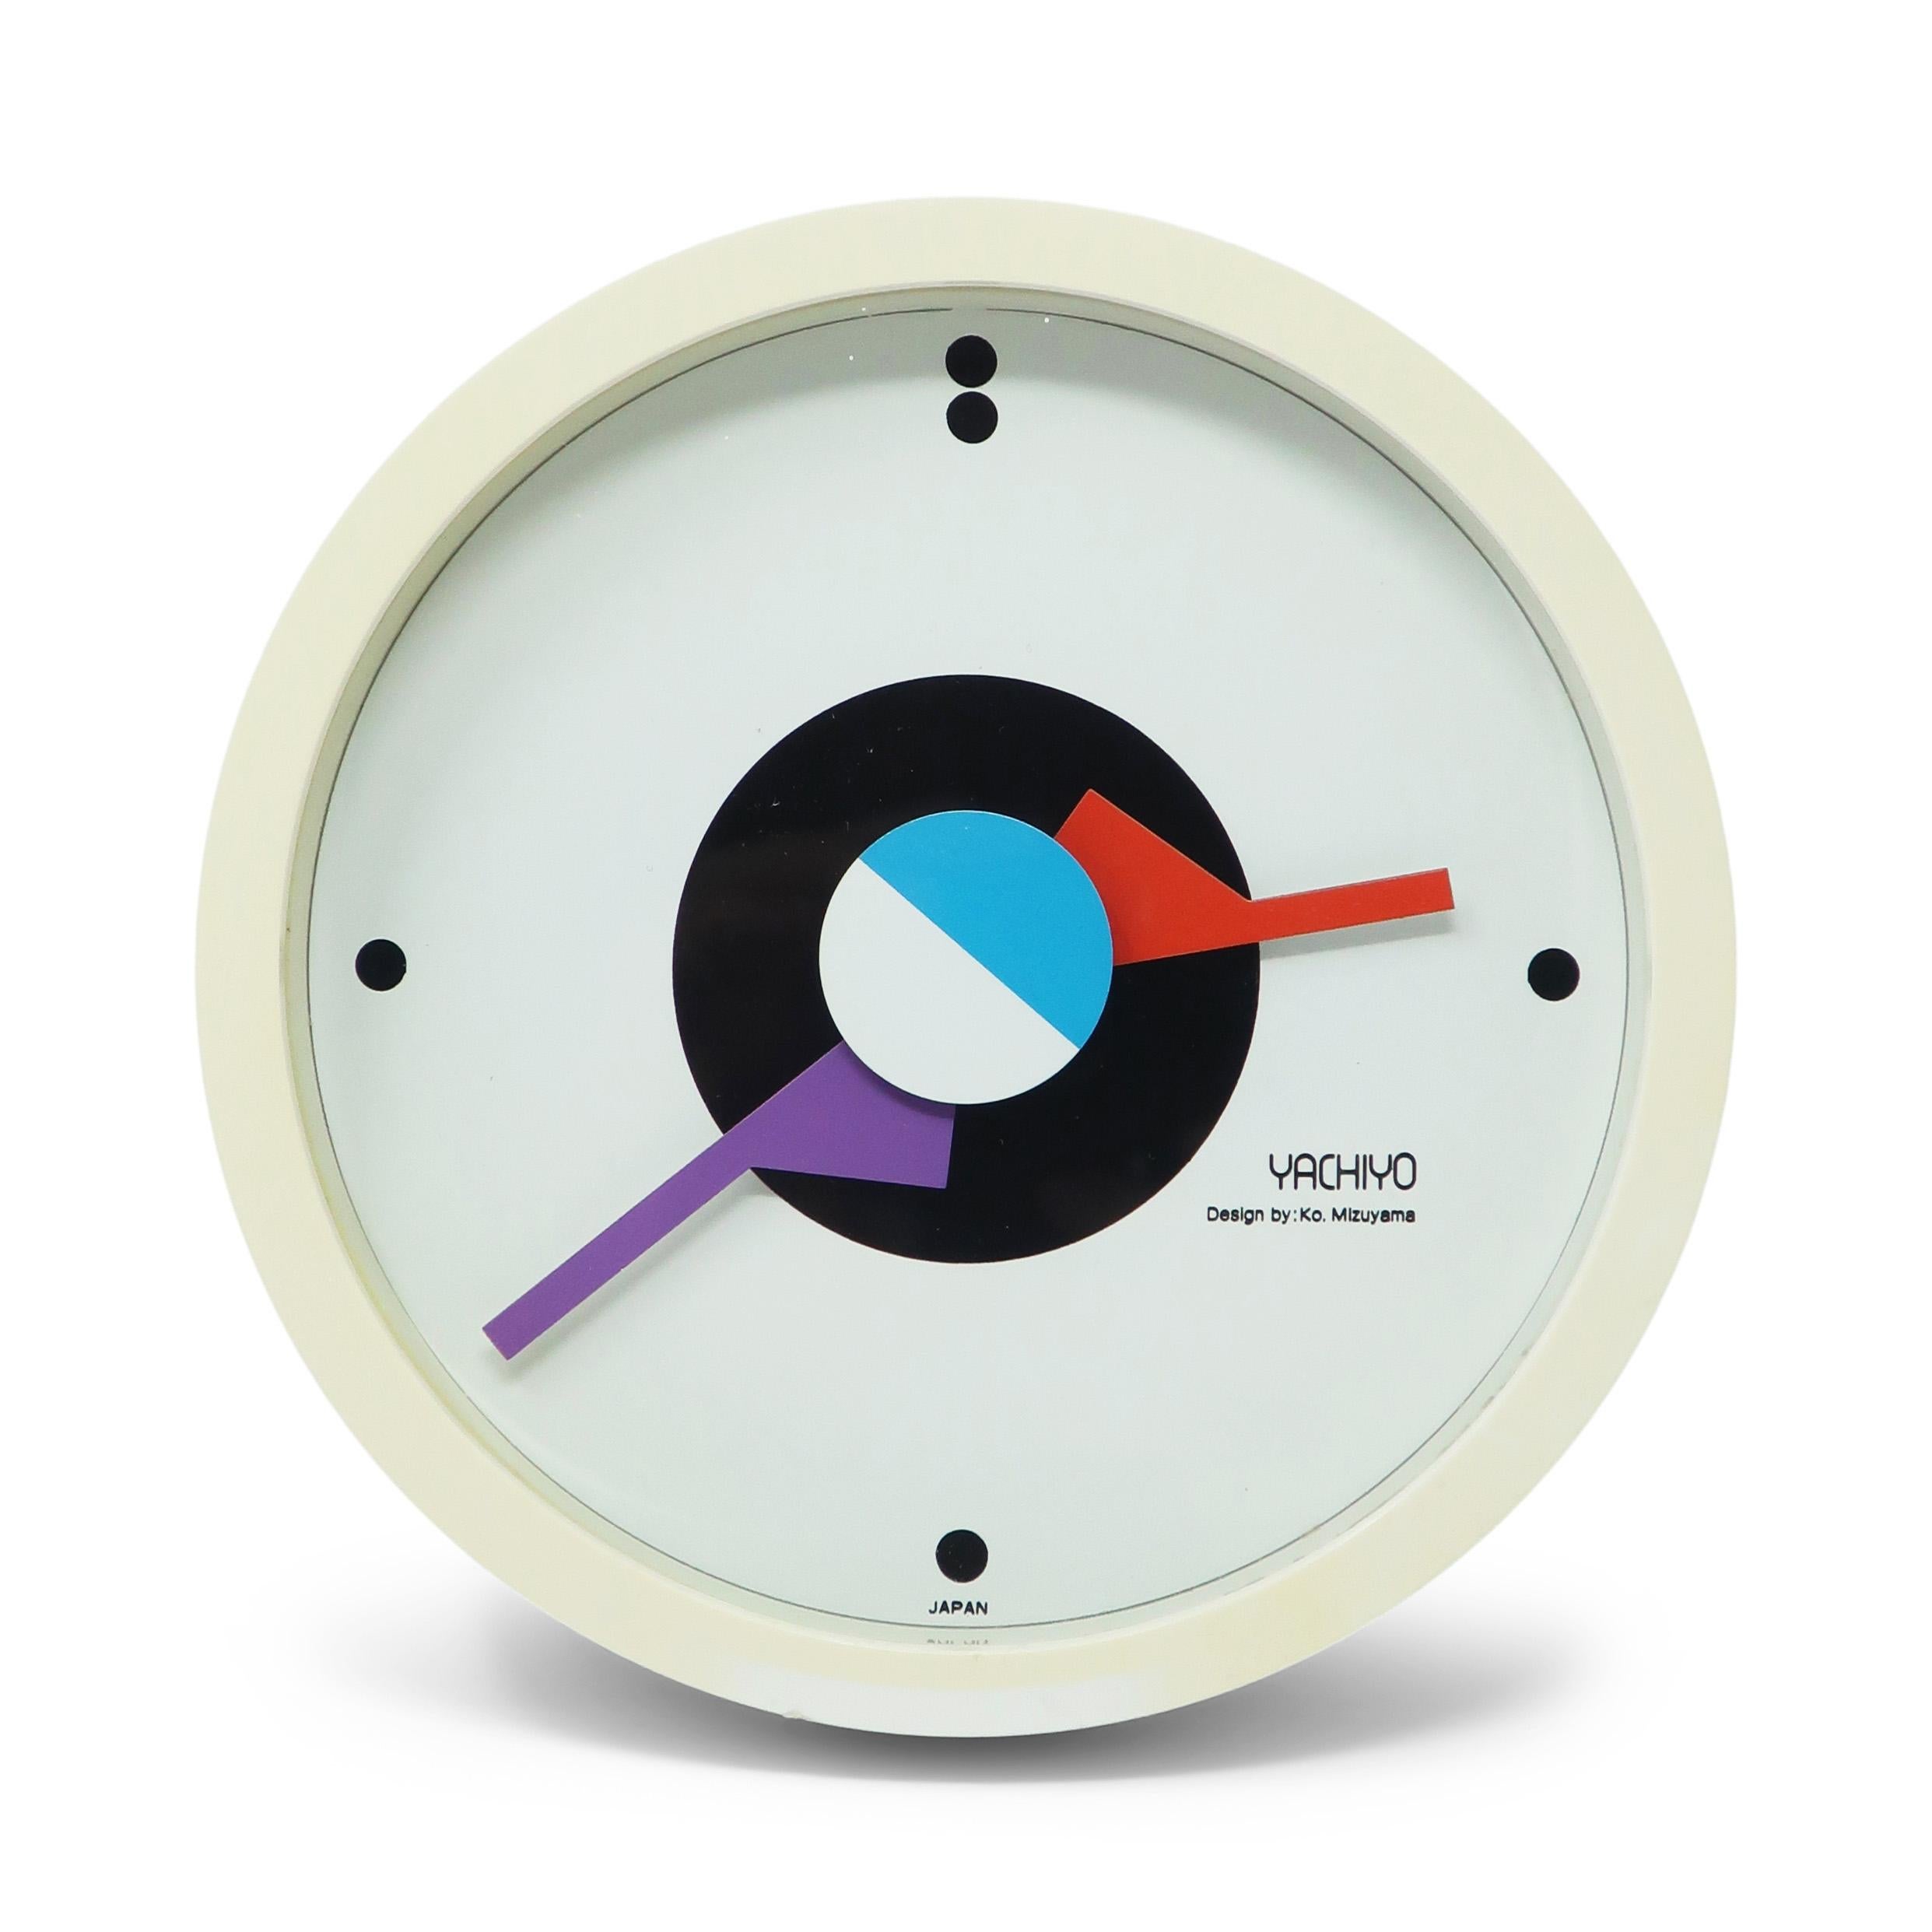 An outstanding round postmodern wall clock designed by Ko Mizuyama, a prolific Japanese designer of clocks in the 1980s.  It has a white plastic case, white face with dots for numbers, and graphical red, purple, white, and blue hands.

In good